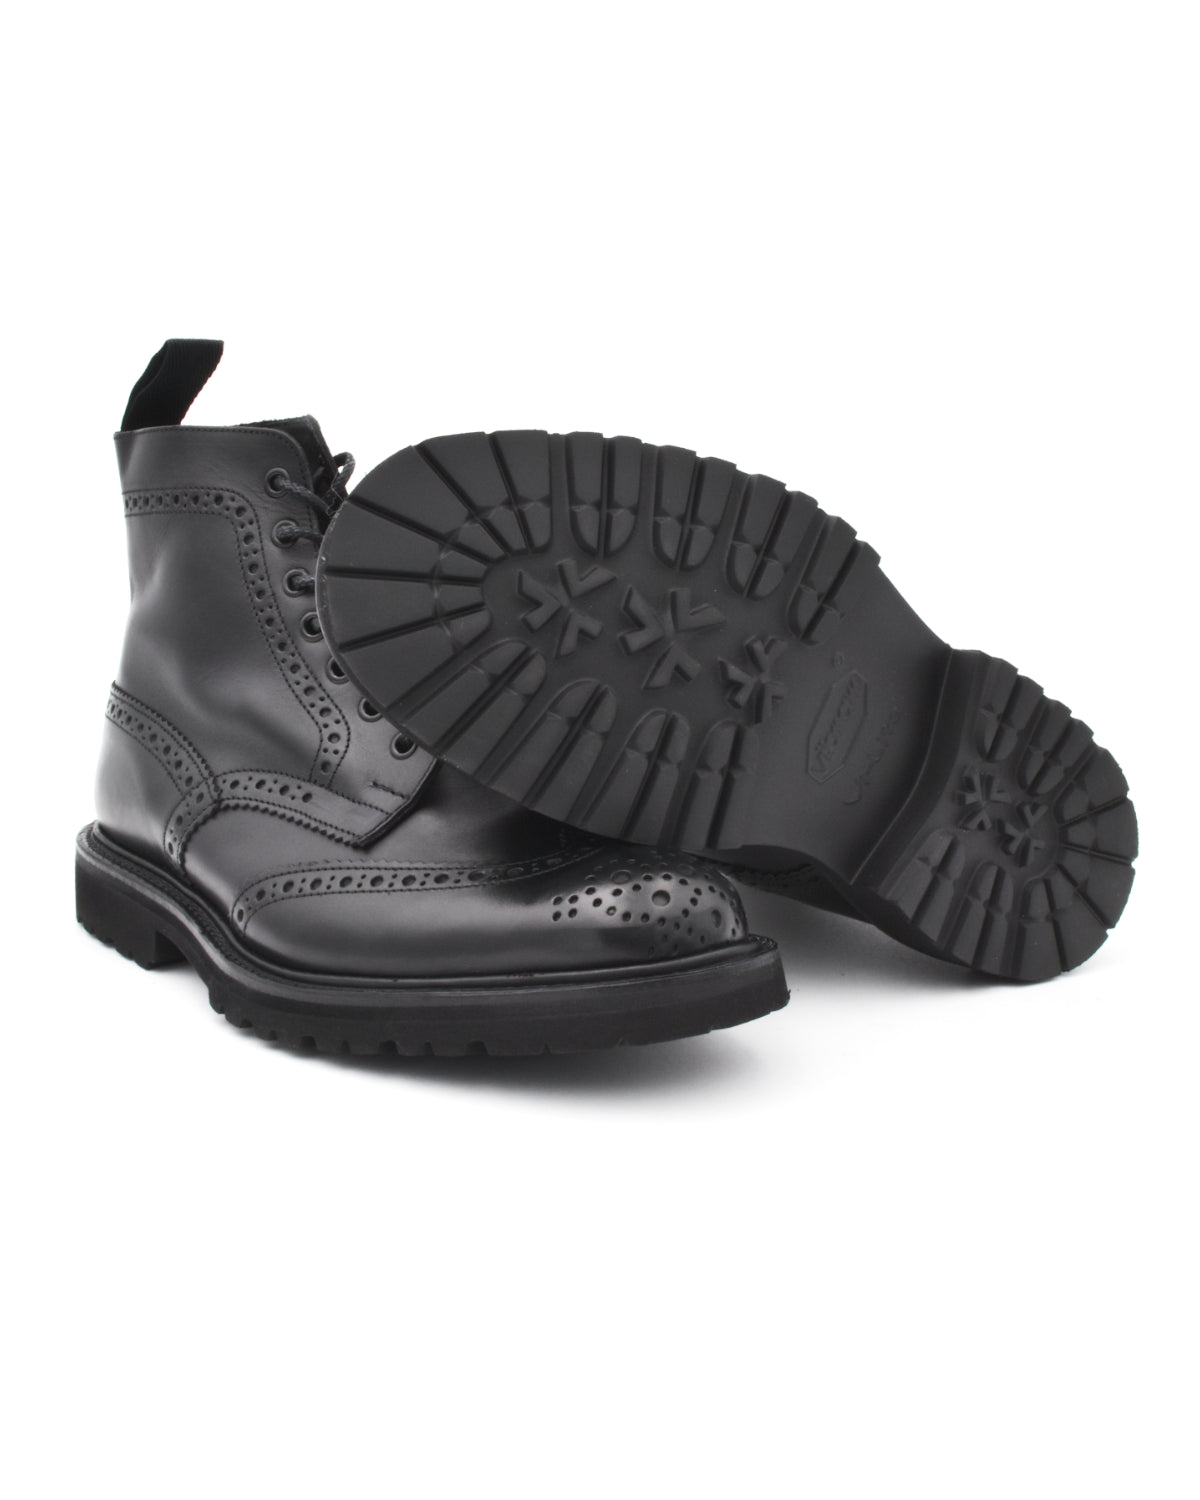 Trickers Black Stow Lace-Up Boot on Vi-Lite Vibram Sole